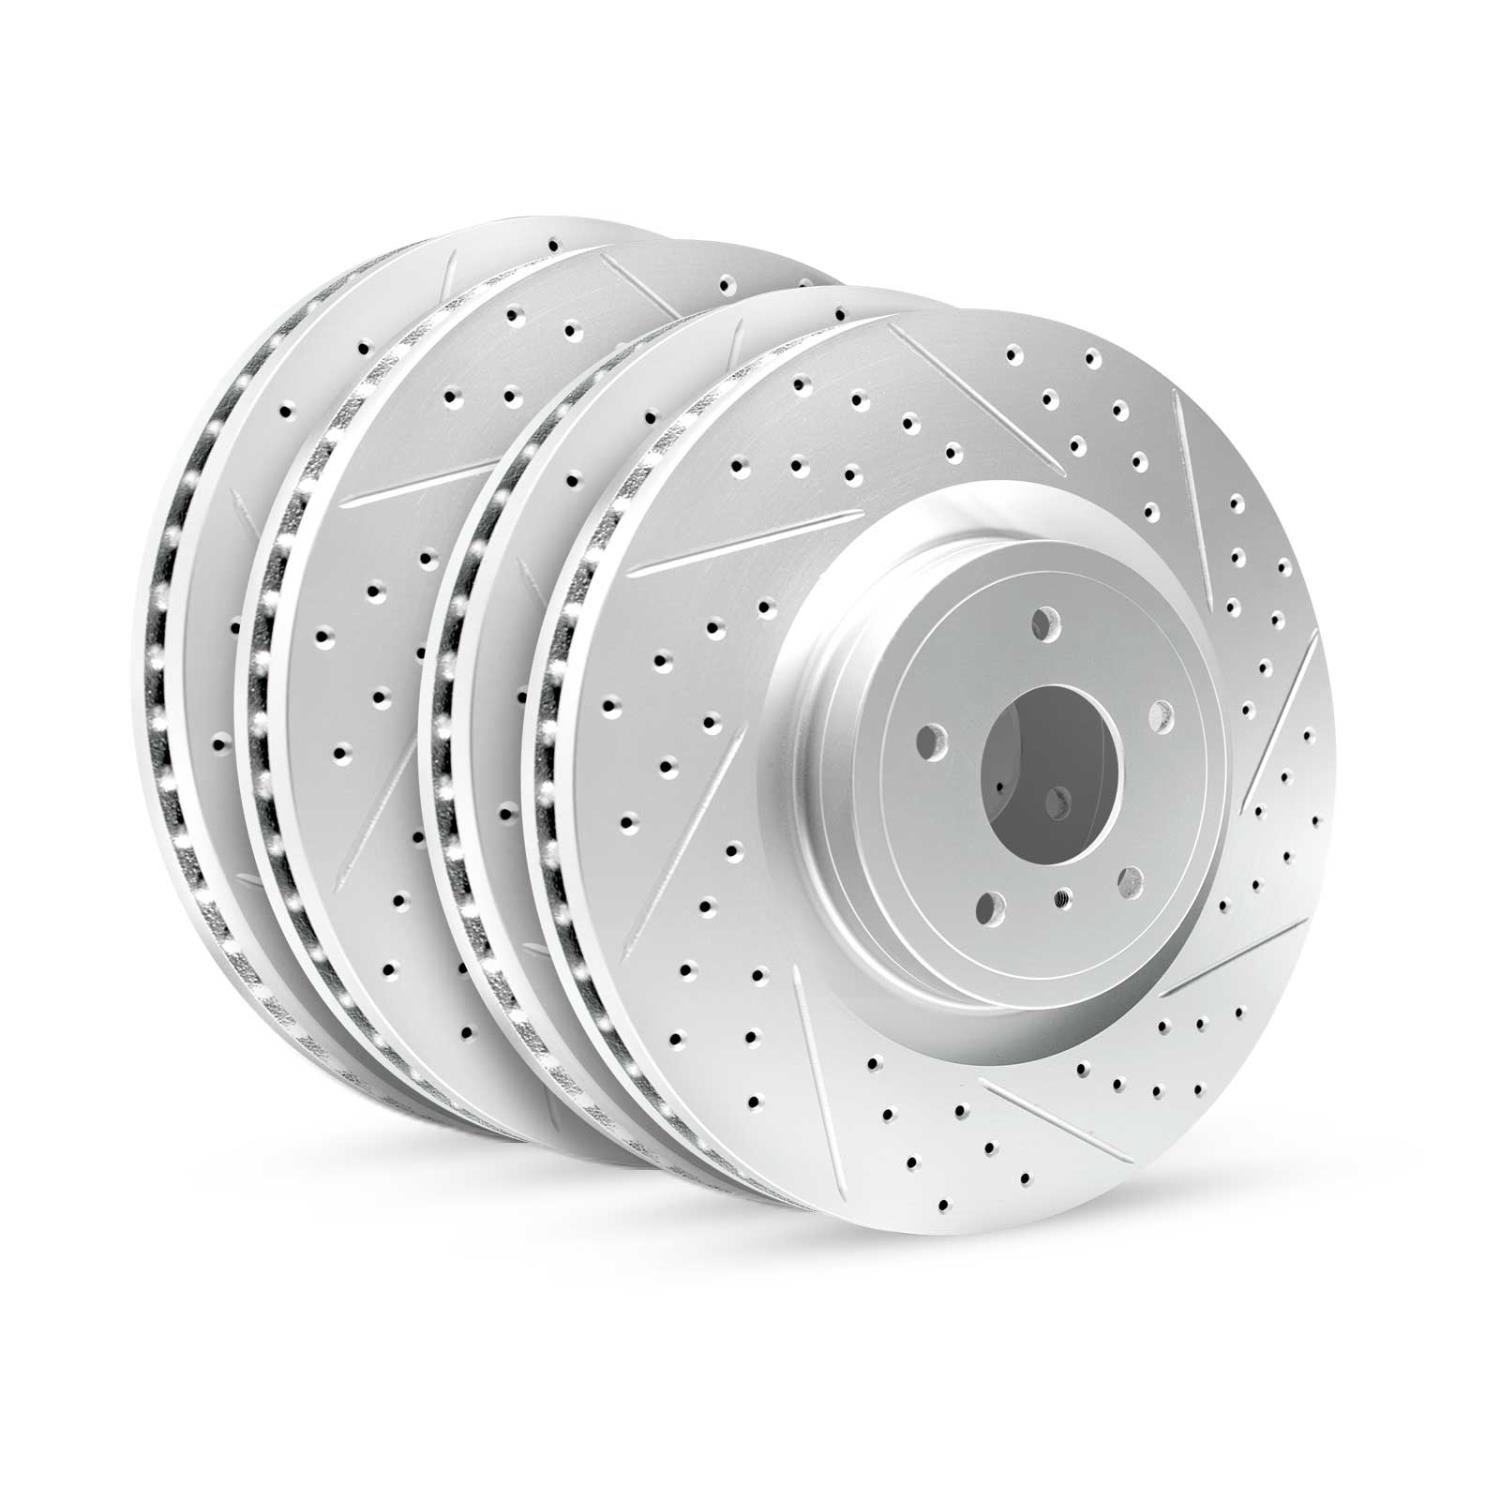 GEO-Carbon Drilled/Slotted Rotors, 2008-2013 Lexus/Toyota/Scion, Position: Front/Rear